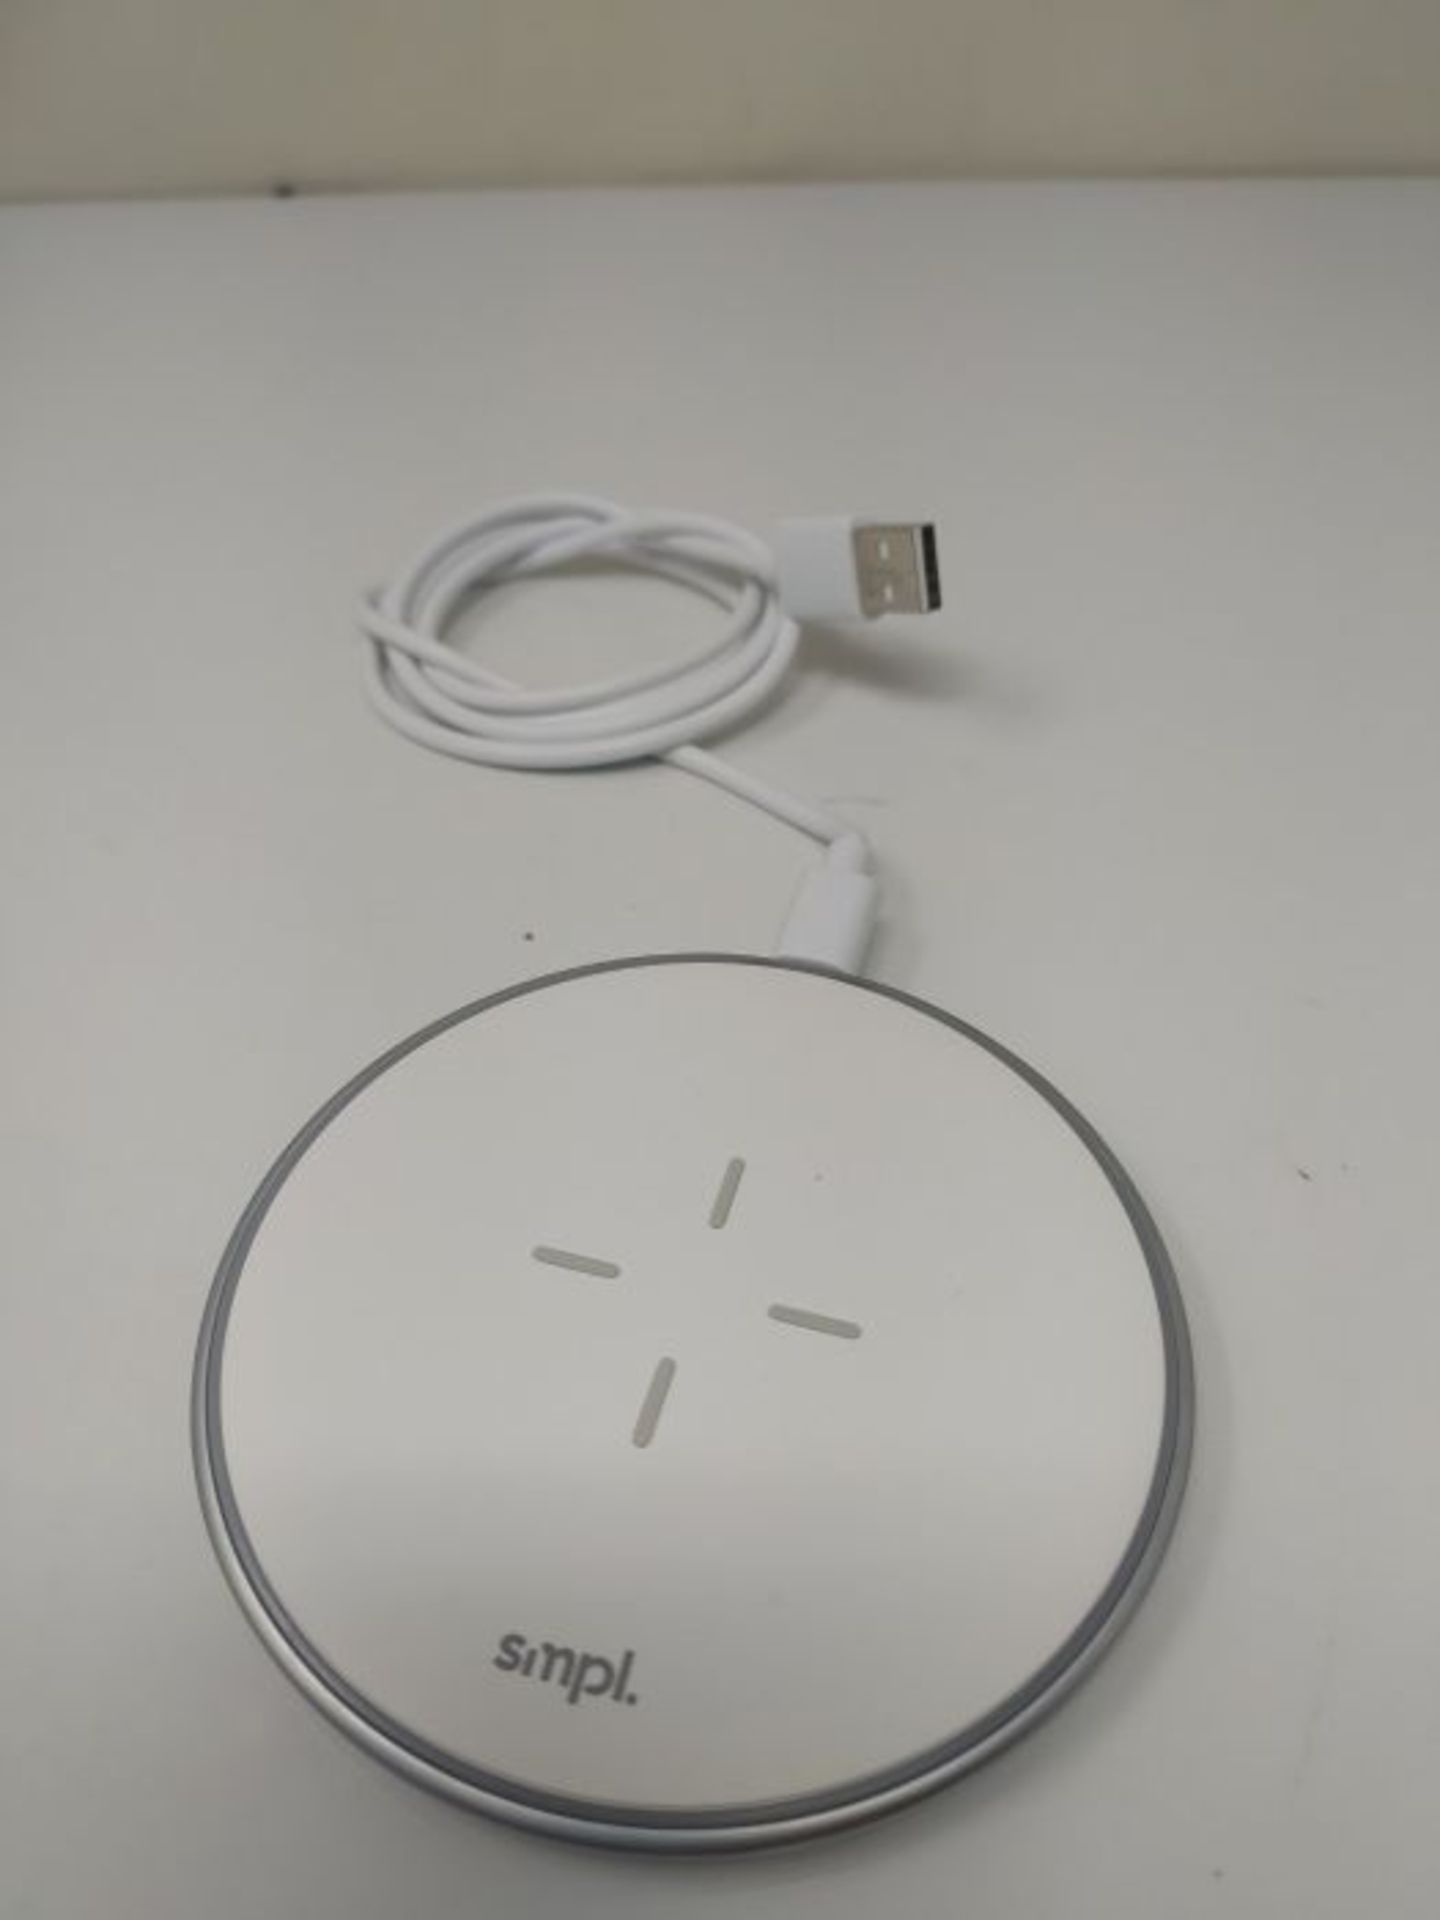 Smpl Fast Wireless Charger - 10W Wireless Charging Pad, Compatible with iPhone 12/12 P - Image 2 of 2